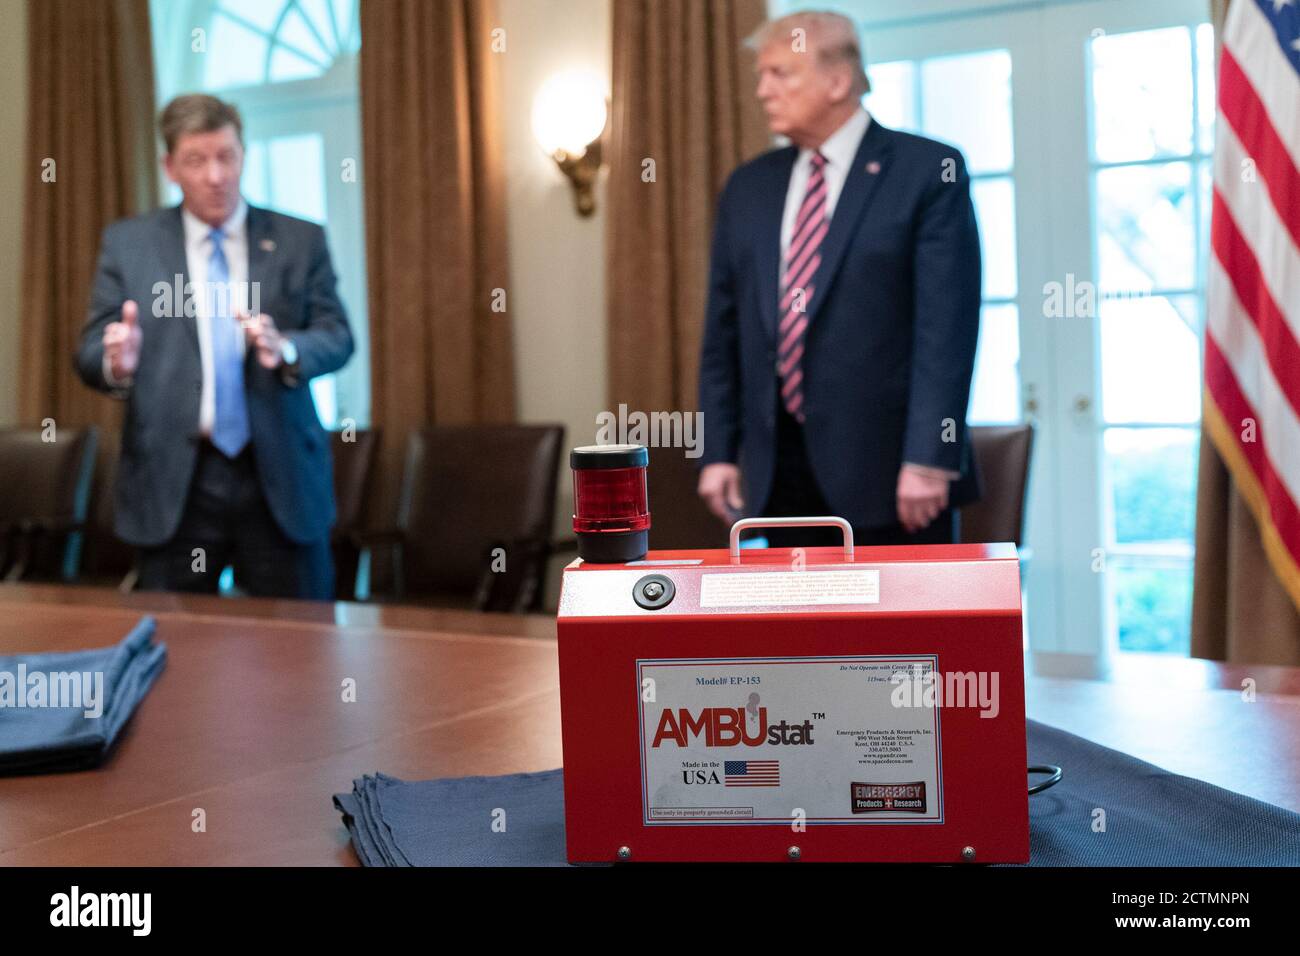 President Trump at a Briefing with NASA. President Donald  J. Trump listens during a briefing with Dave Gallagher, Associate Director at the NASA Jet Propulsion Laboratory, explaining the development of devices like the AMBUstat  that helps decontaminate spaces like ambulances in less than hour, as part of NASA’s response to the COIVD-19 Coronavirus Friday, April 24, 2020, in the Cabinet Room of the White House. This device was developed from technology used to sterilize a spacecraft. Stock Photo